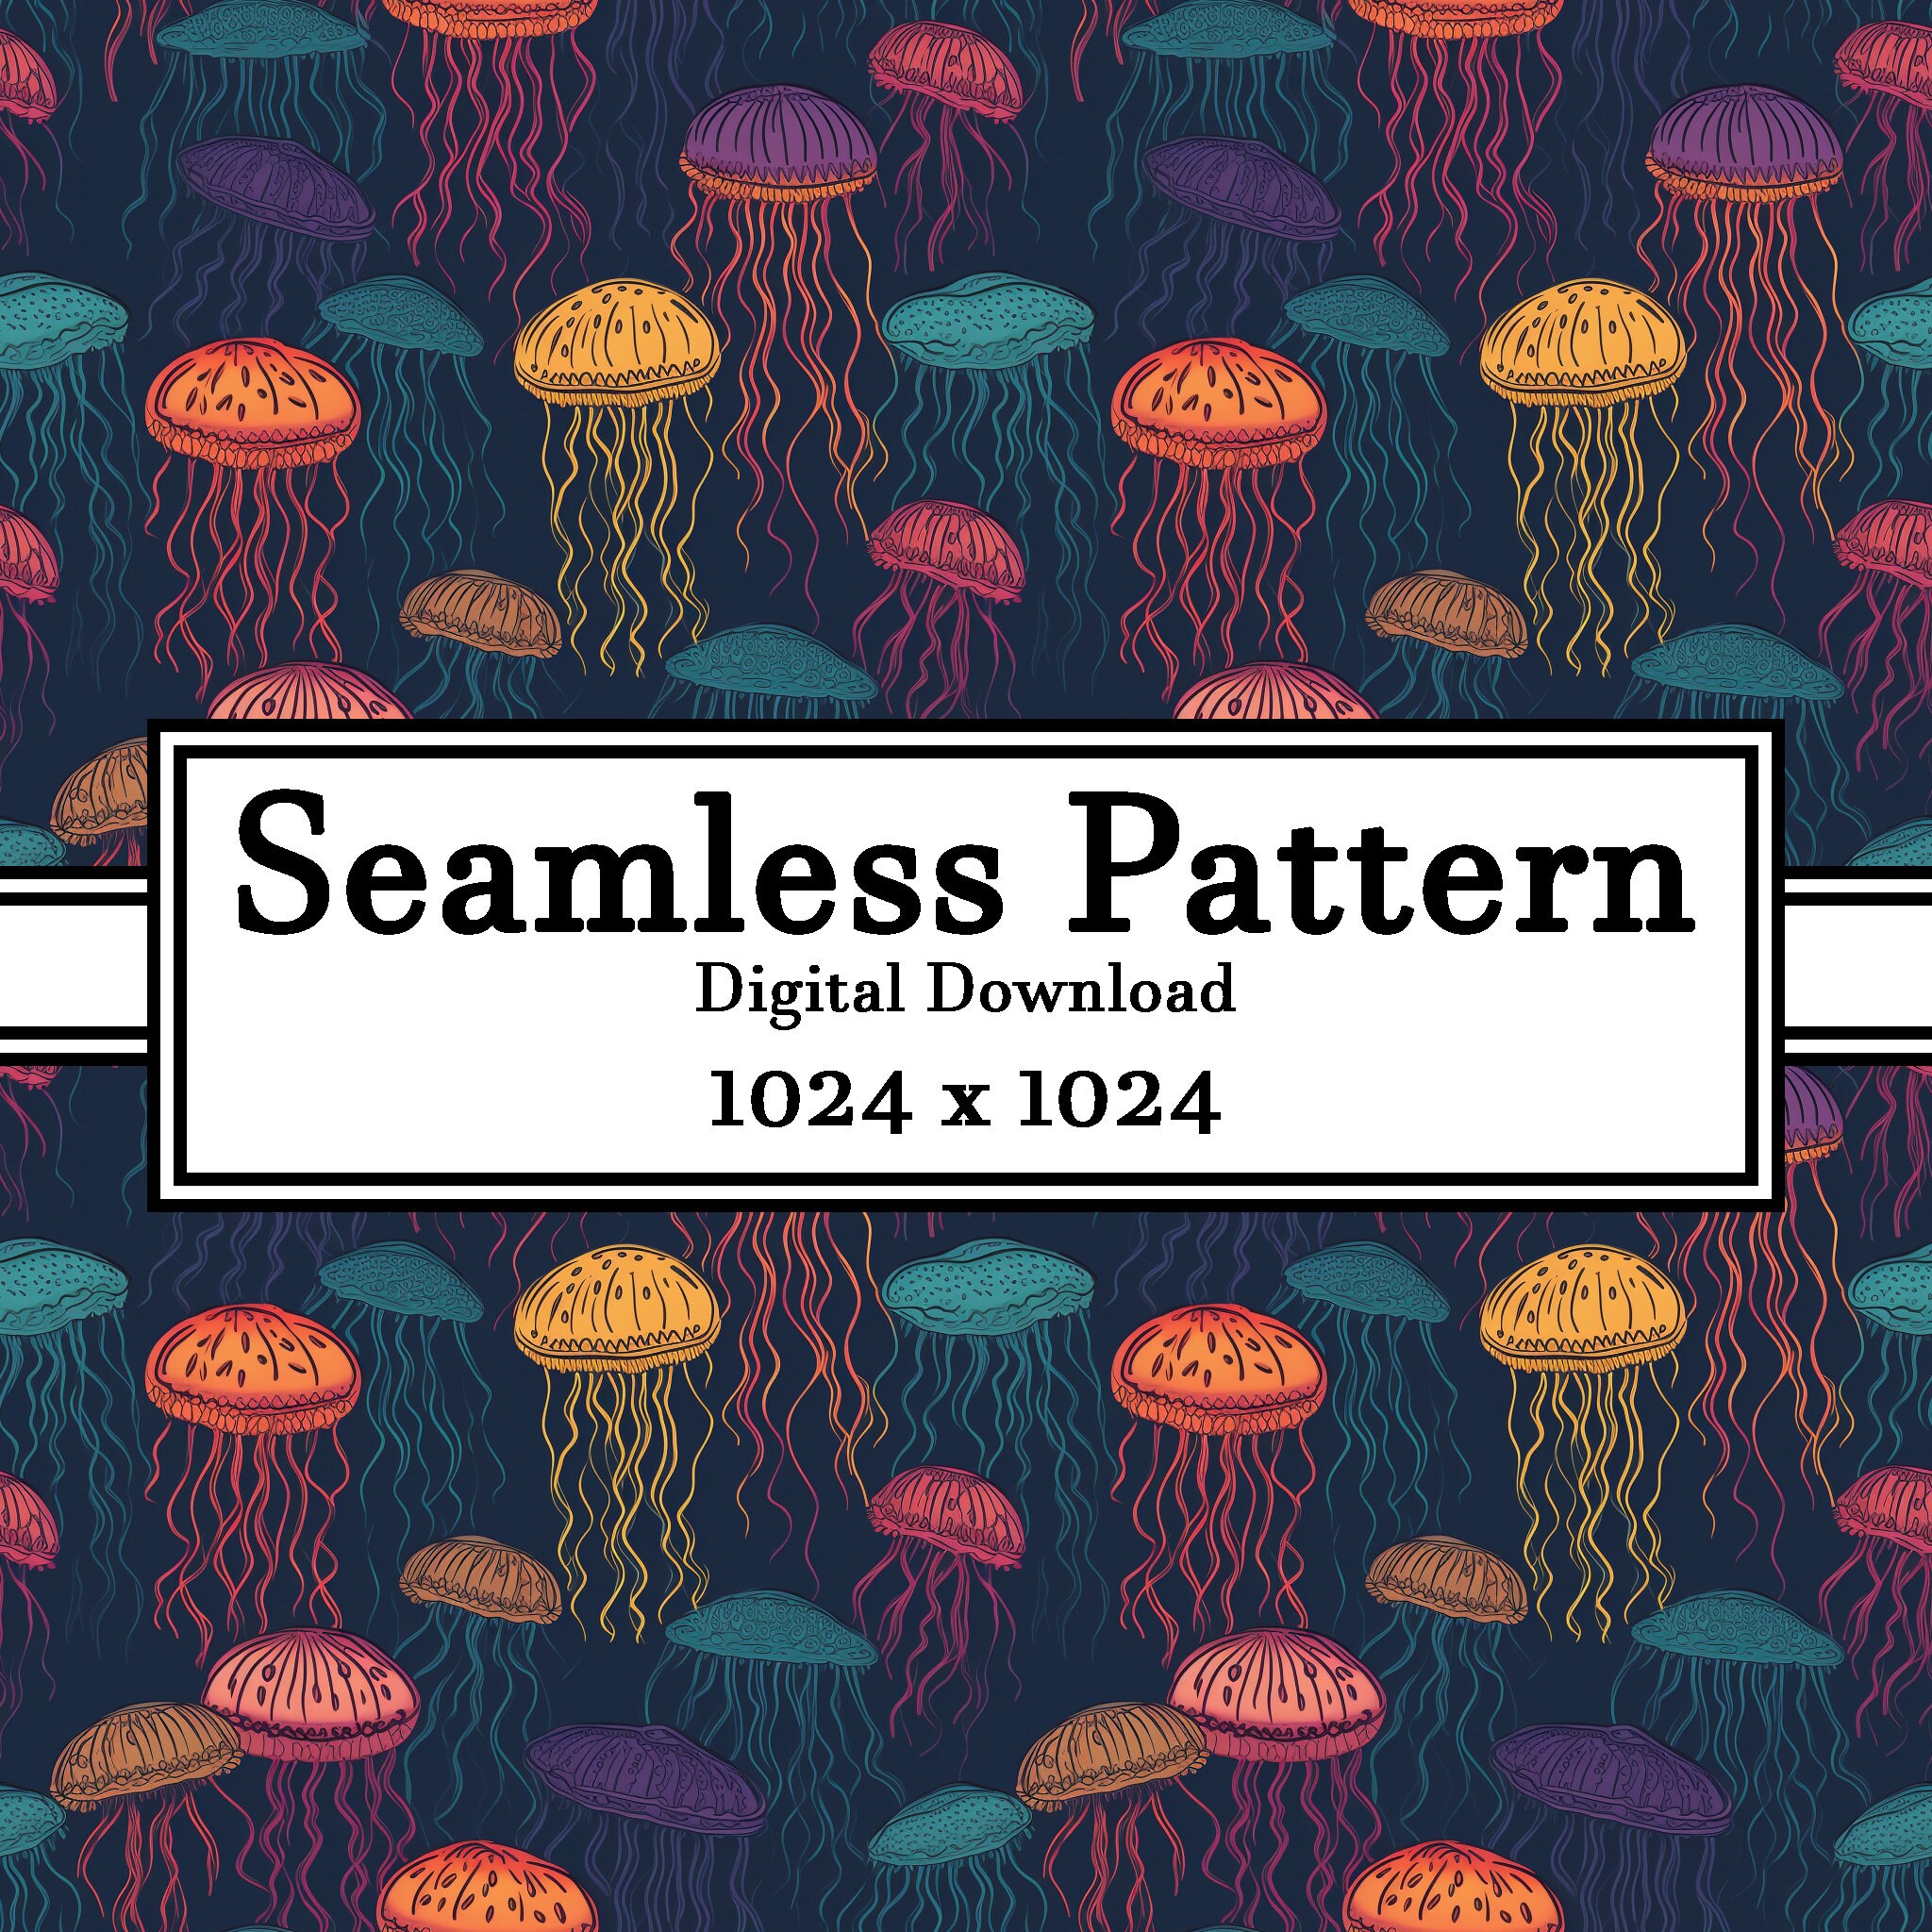 PAttern is Jellyfish from The VisualWRap Pattern Downloads. Shaded